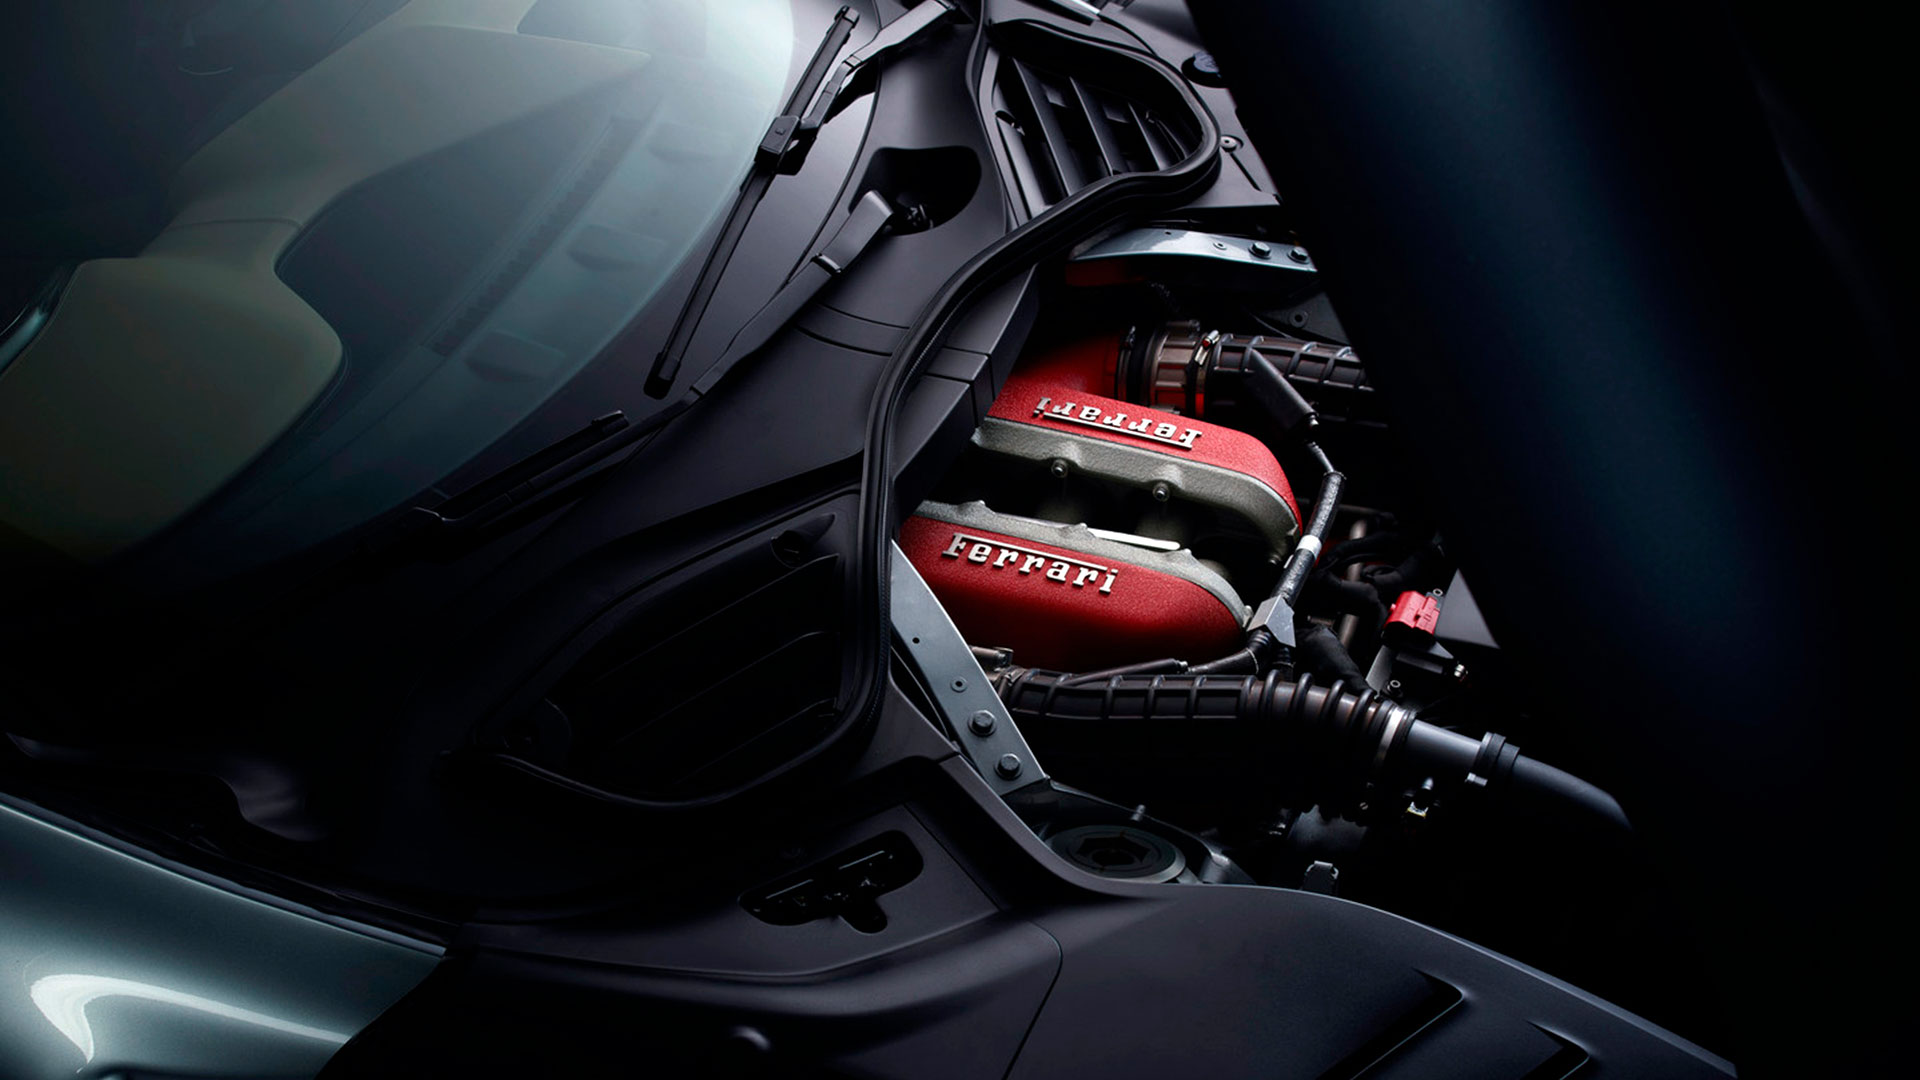 The location of the 6.5 liter V12 is nearly central as it is positioned inside the cabin to carry weight to the rear.